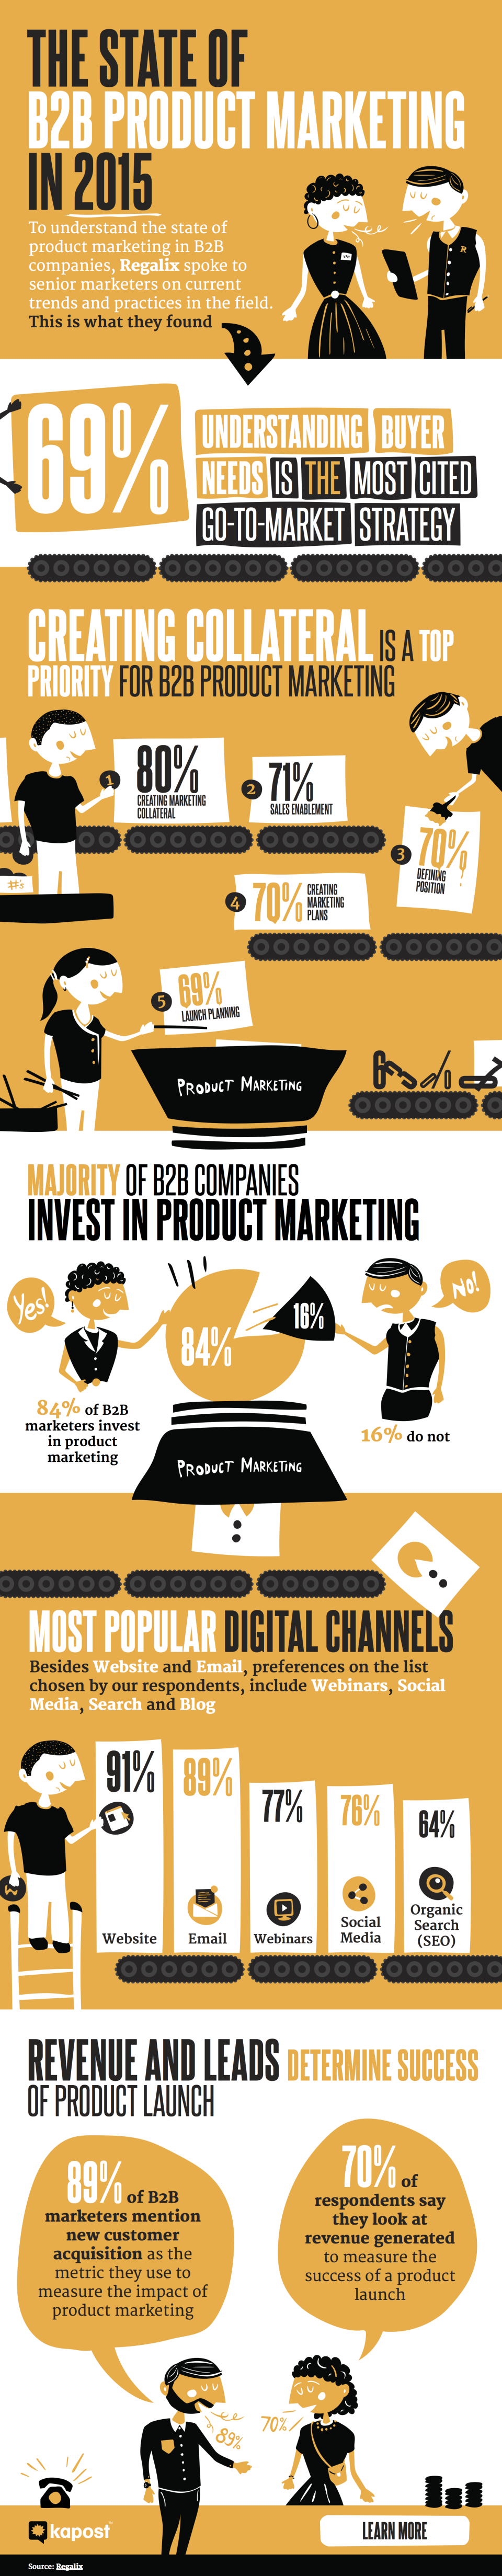 the state of b2b product marketing infographic